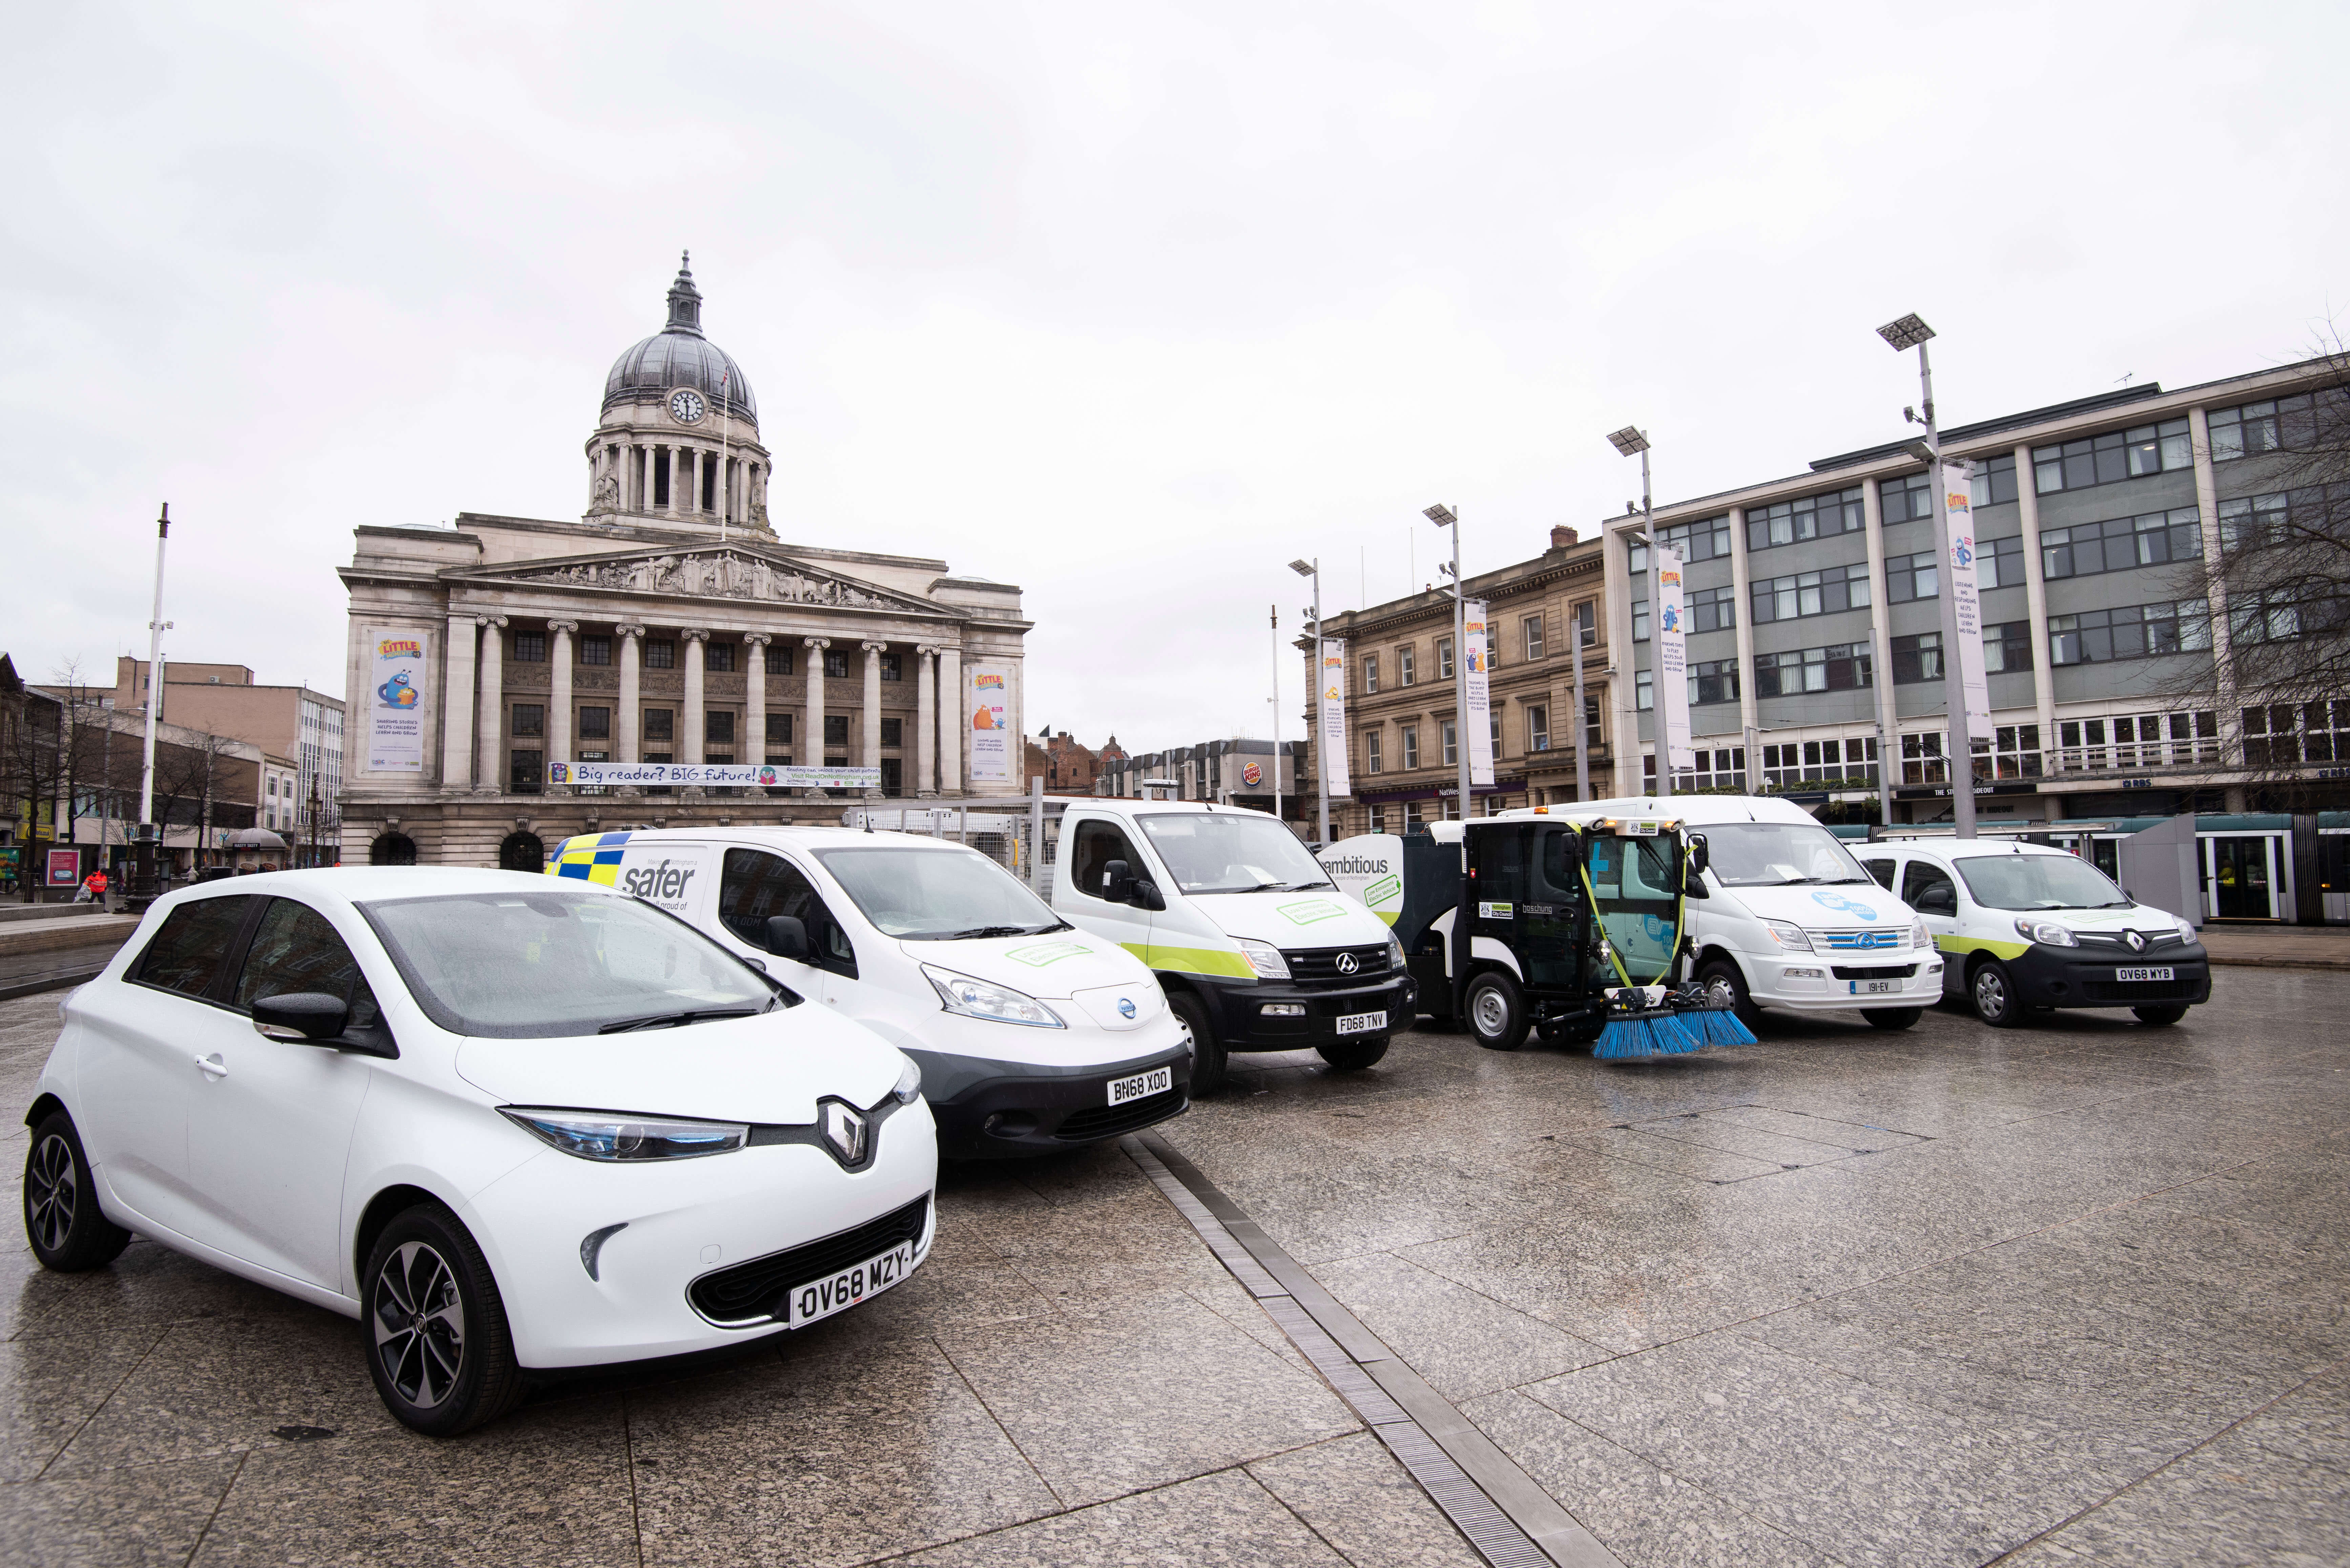 Some of the council's electric vehicles